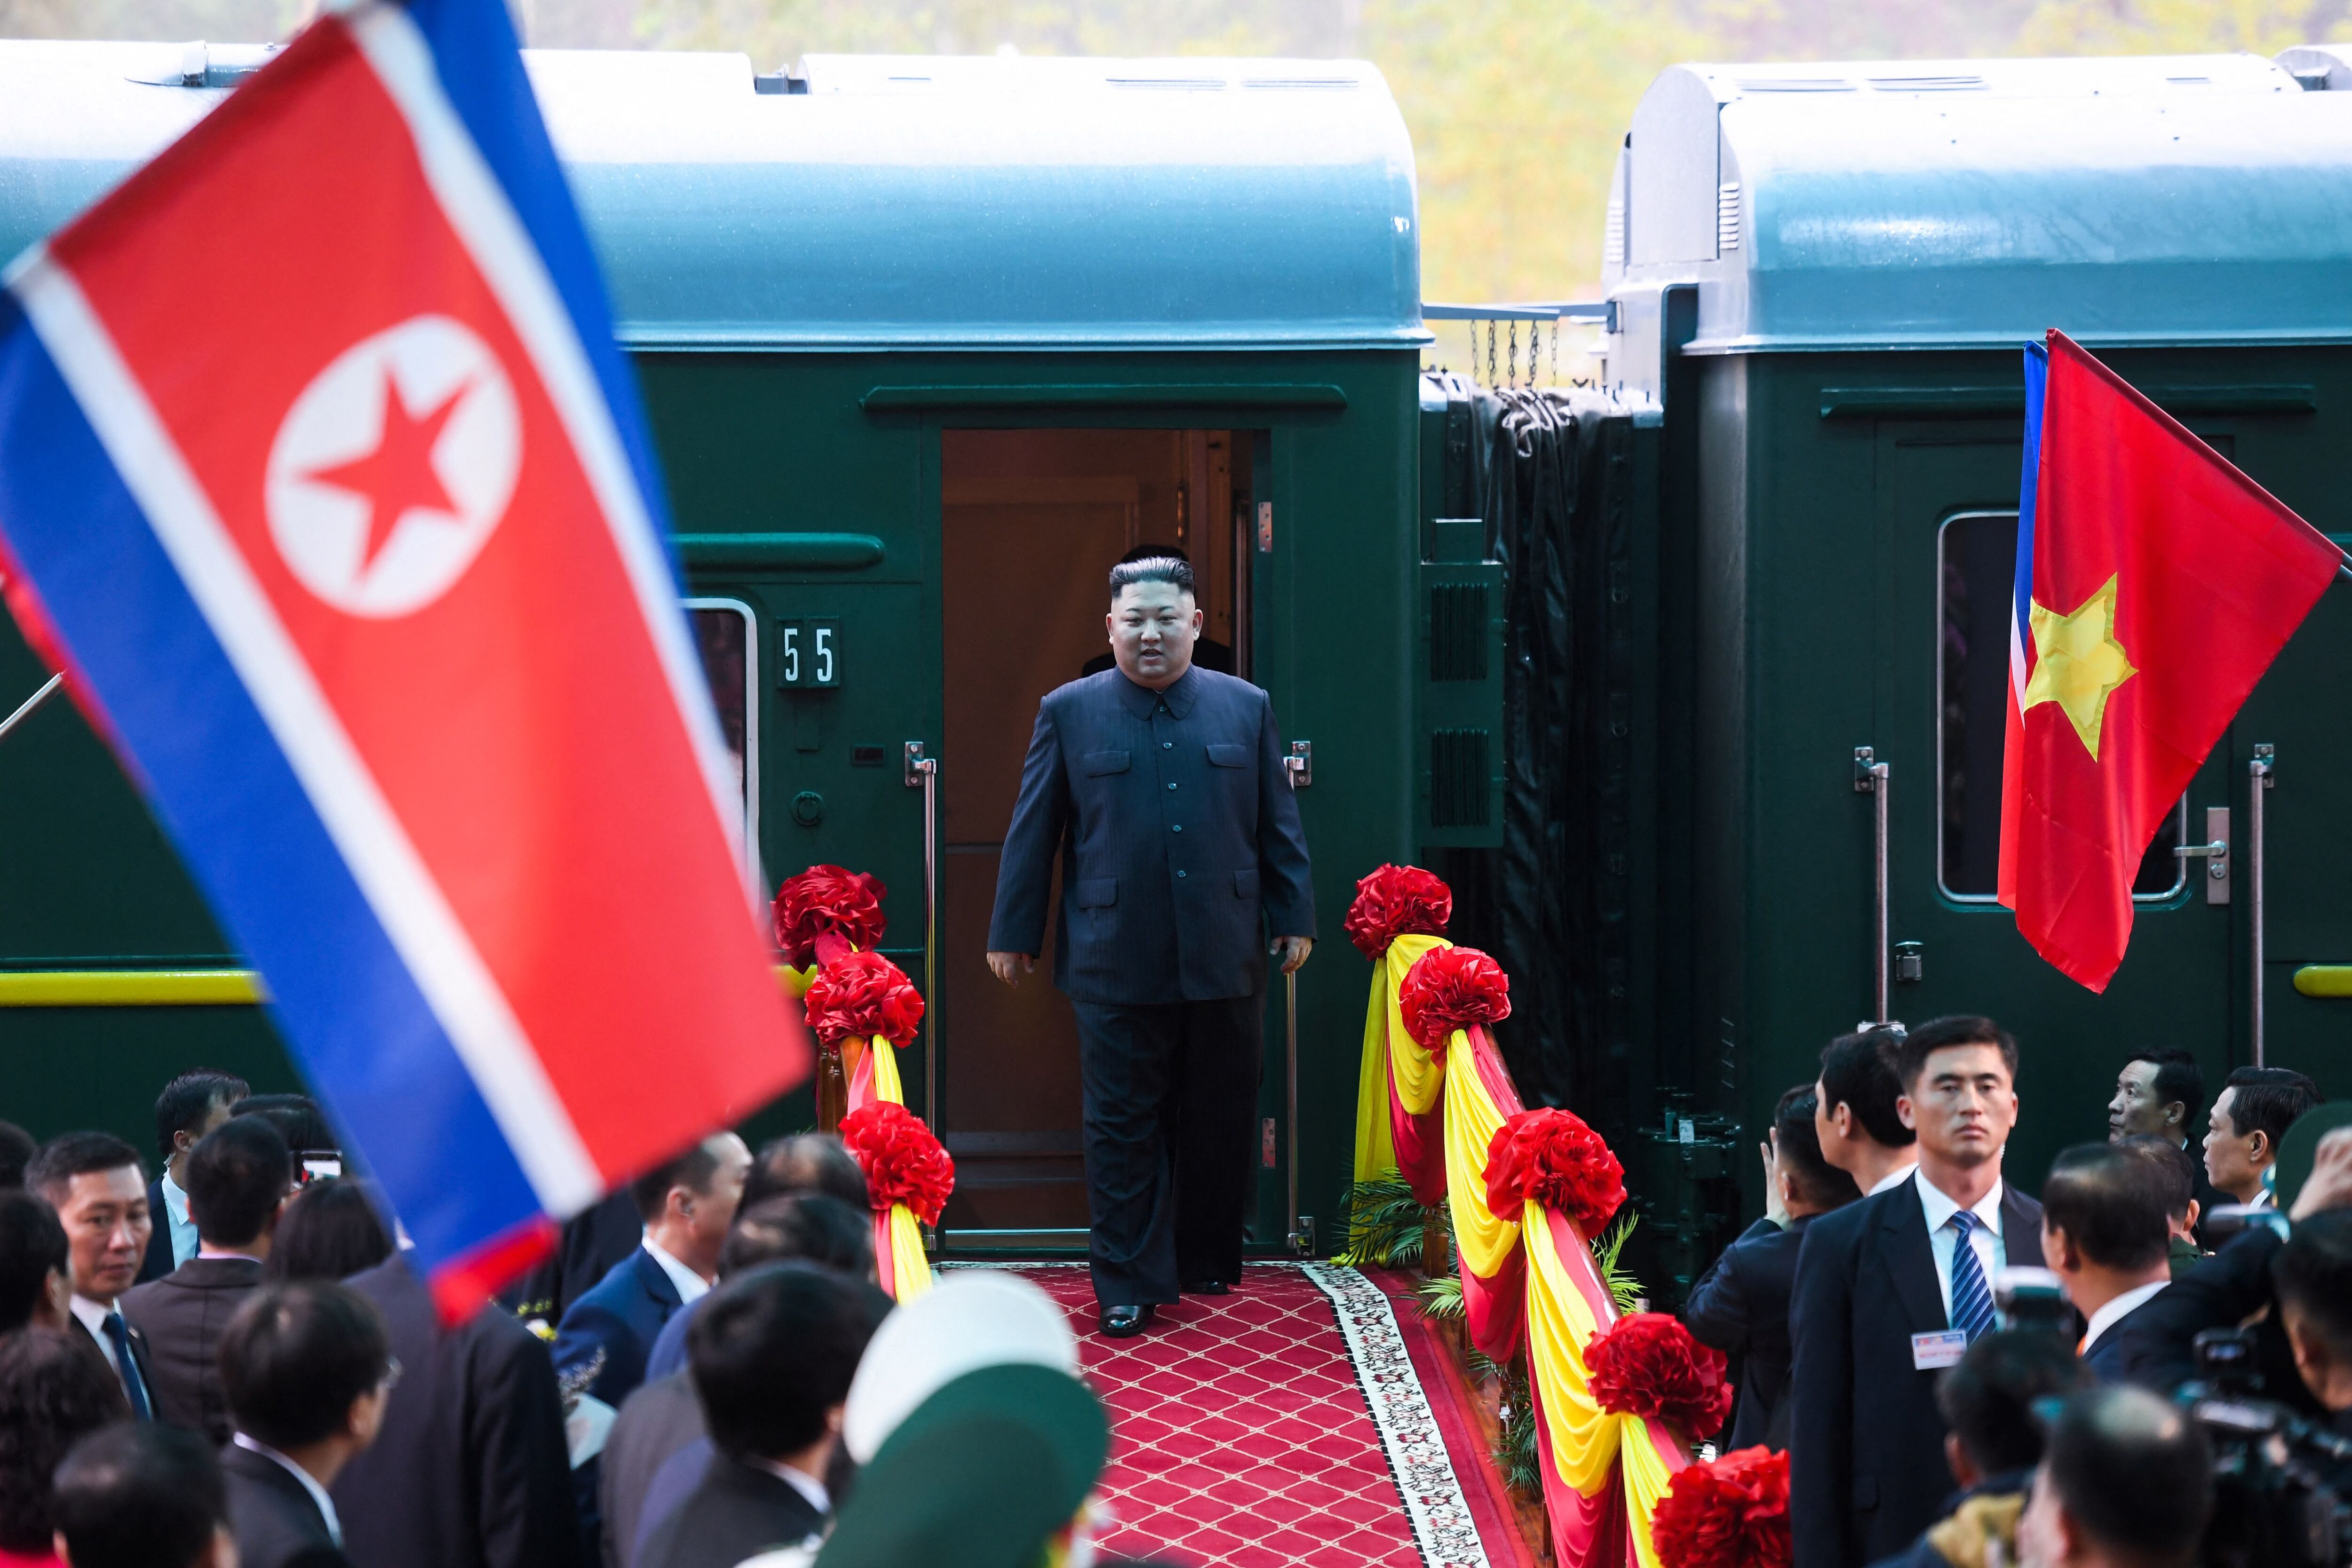 Kim Jong-un arrives at the Dong Dang train station, Lang Son province, Vietnam, on February 26, 2019. (Photo by AFP).